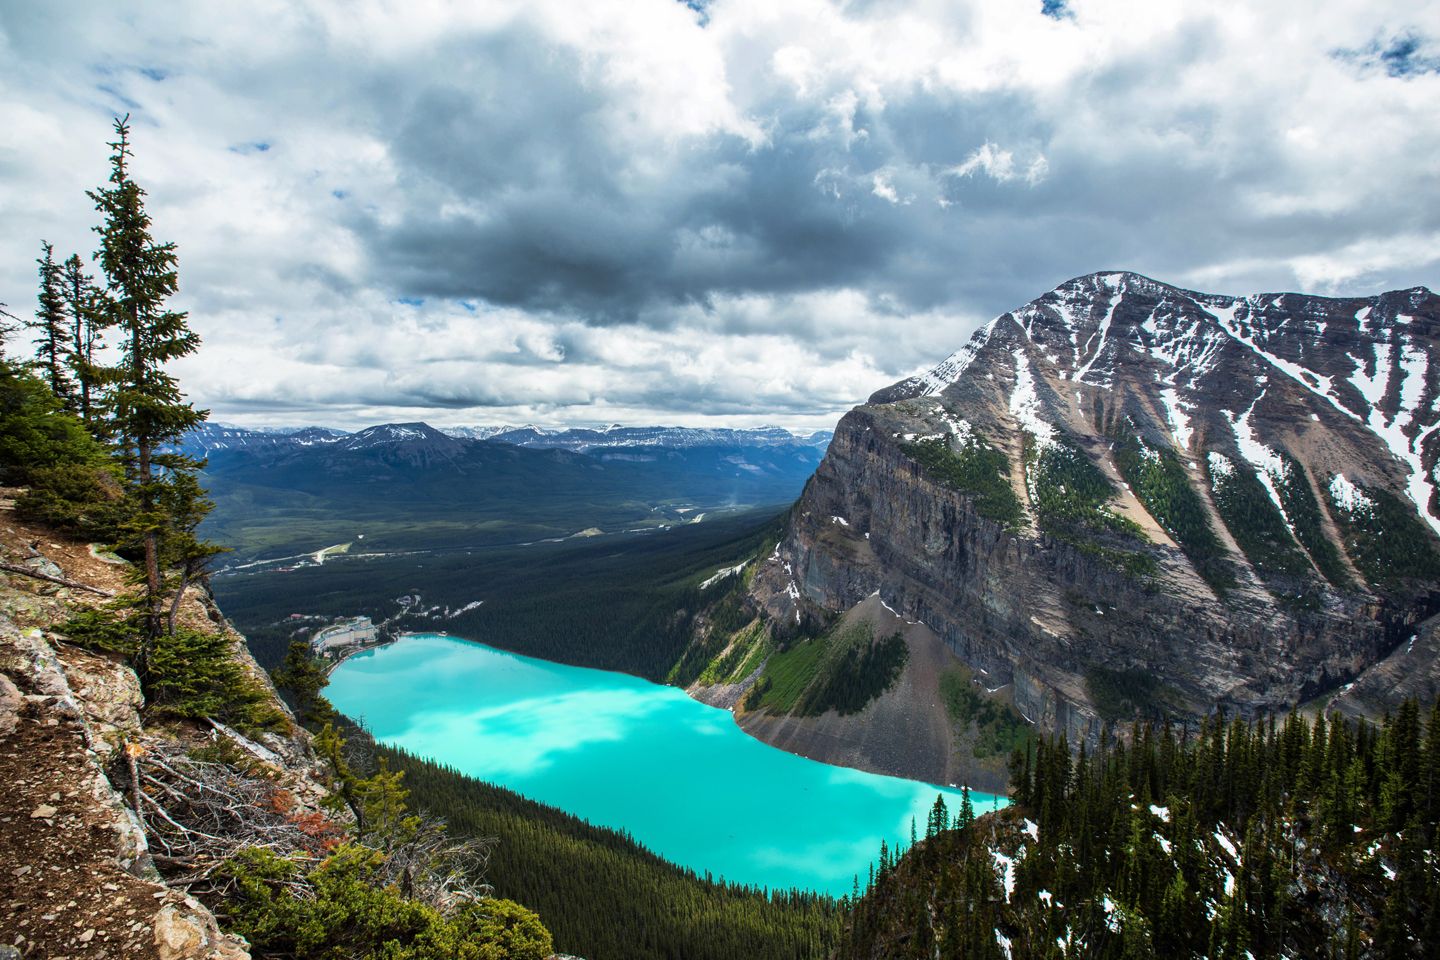 A beginner's guide to Lake Louise